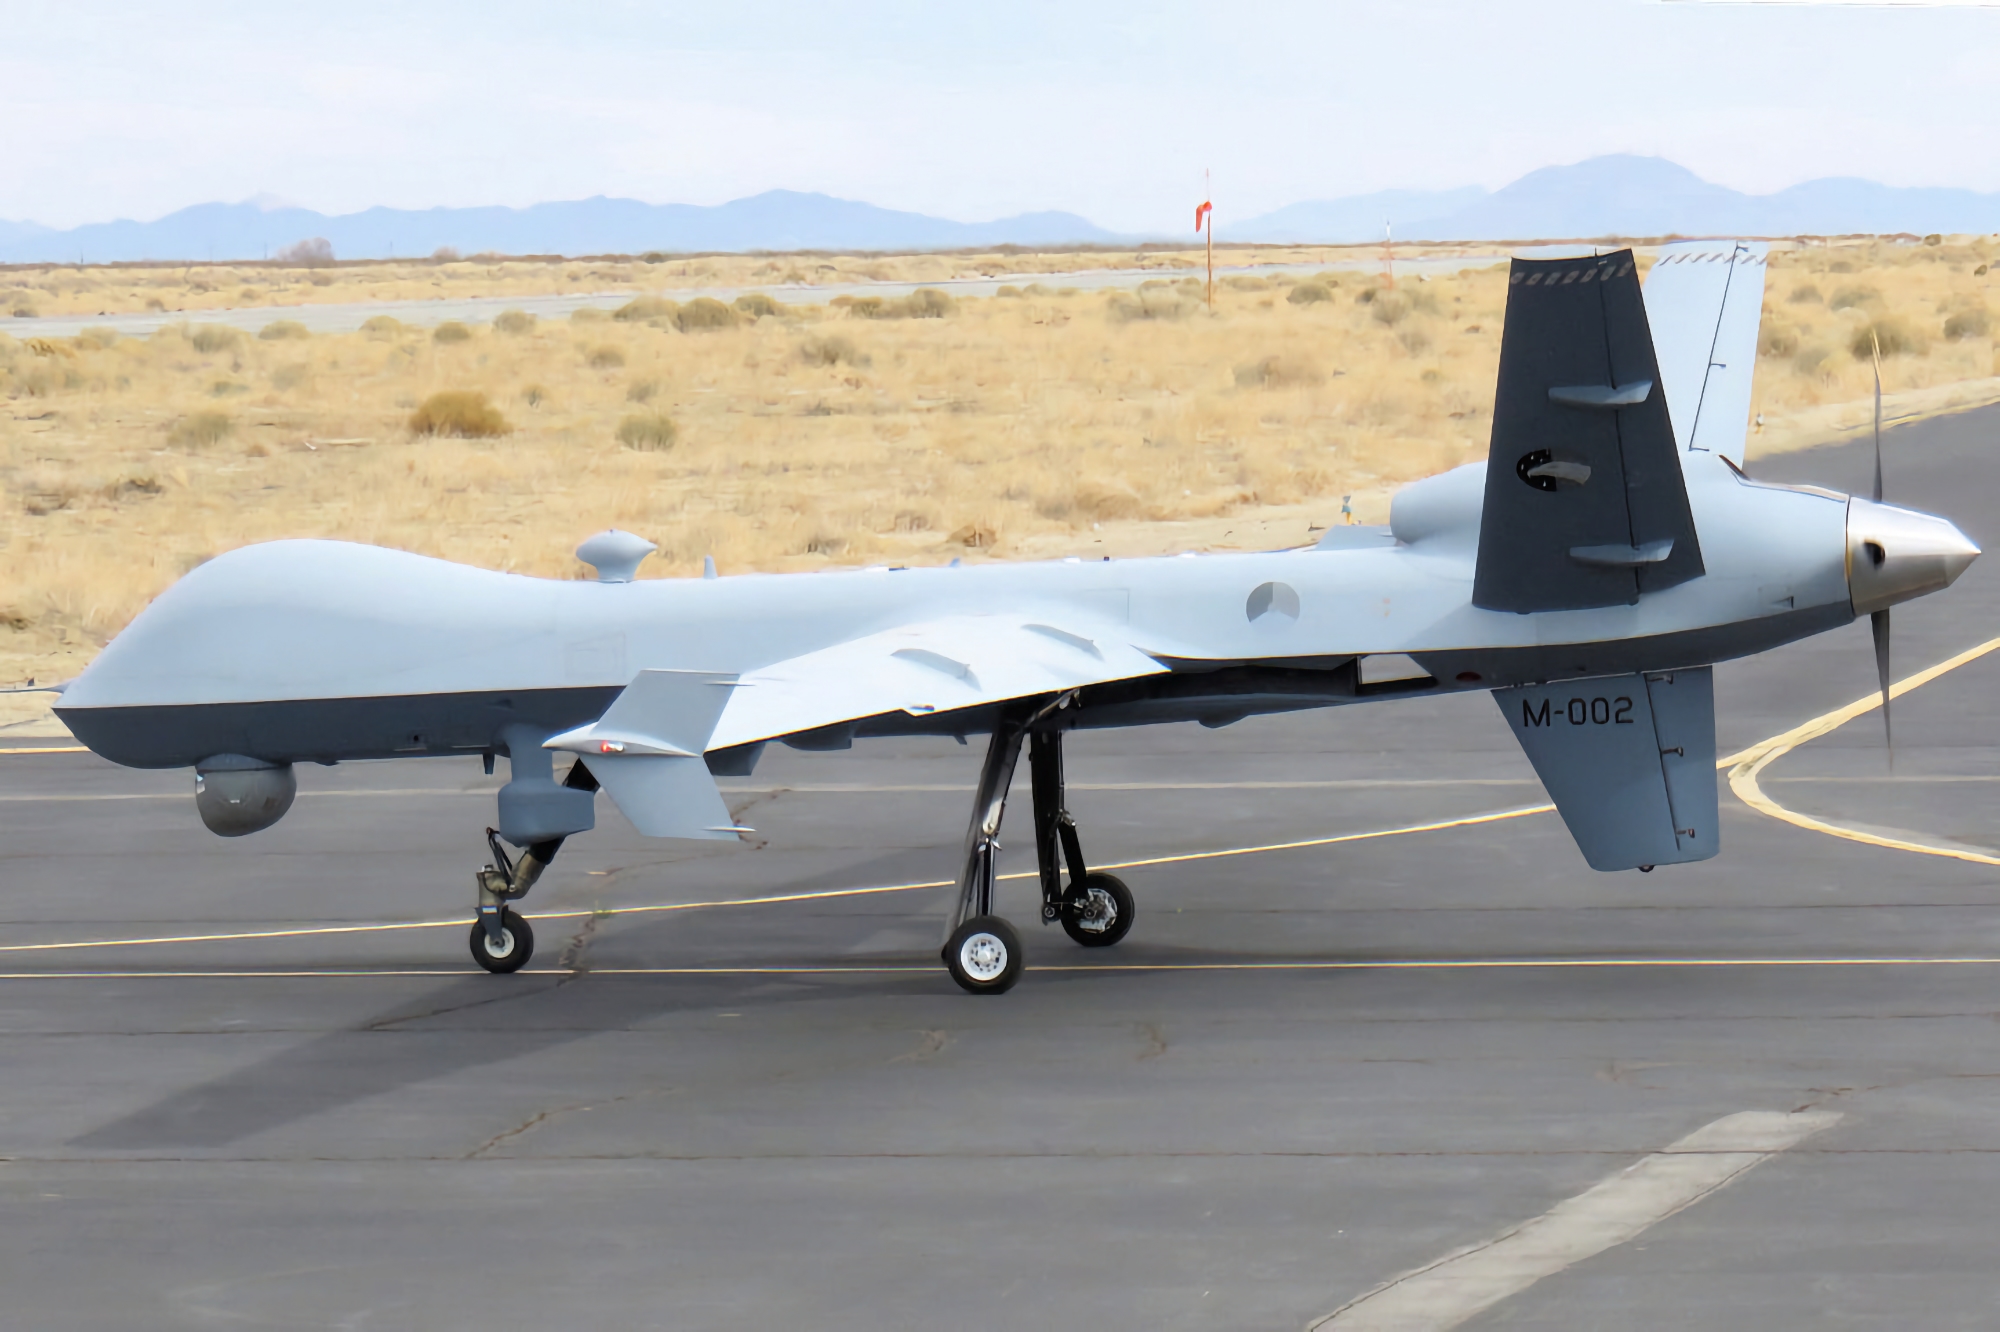 Netherlands orders additional batch of MQ-9A Reaper drones worth $611 million